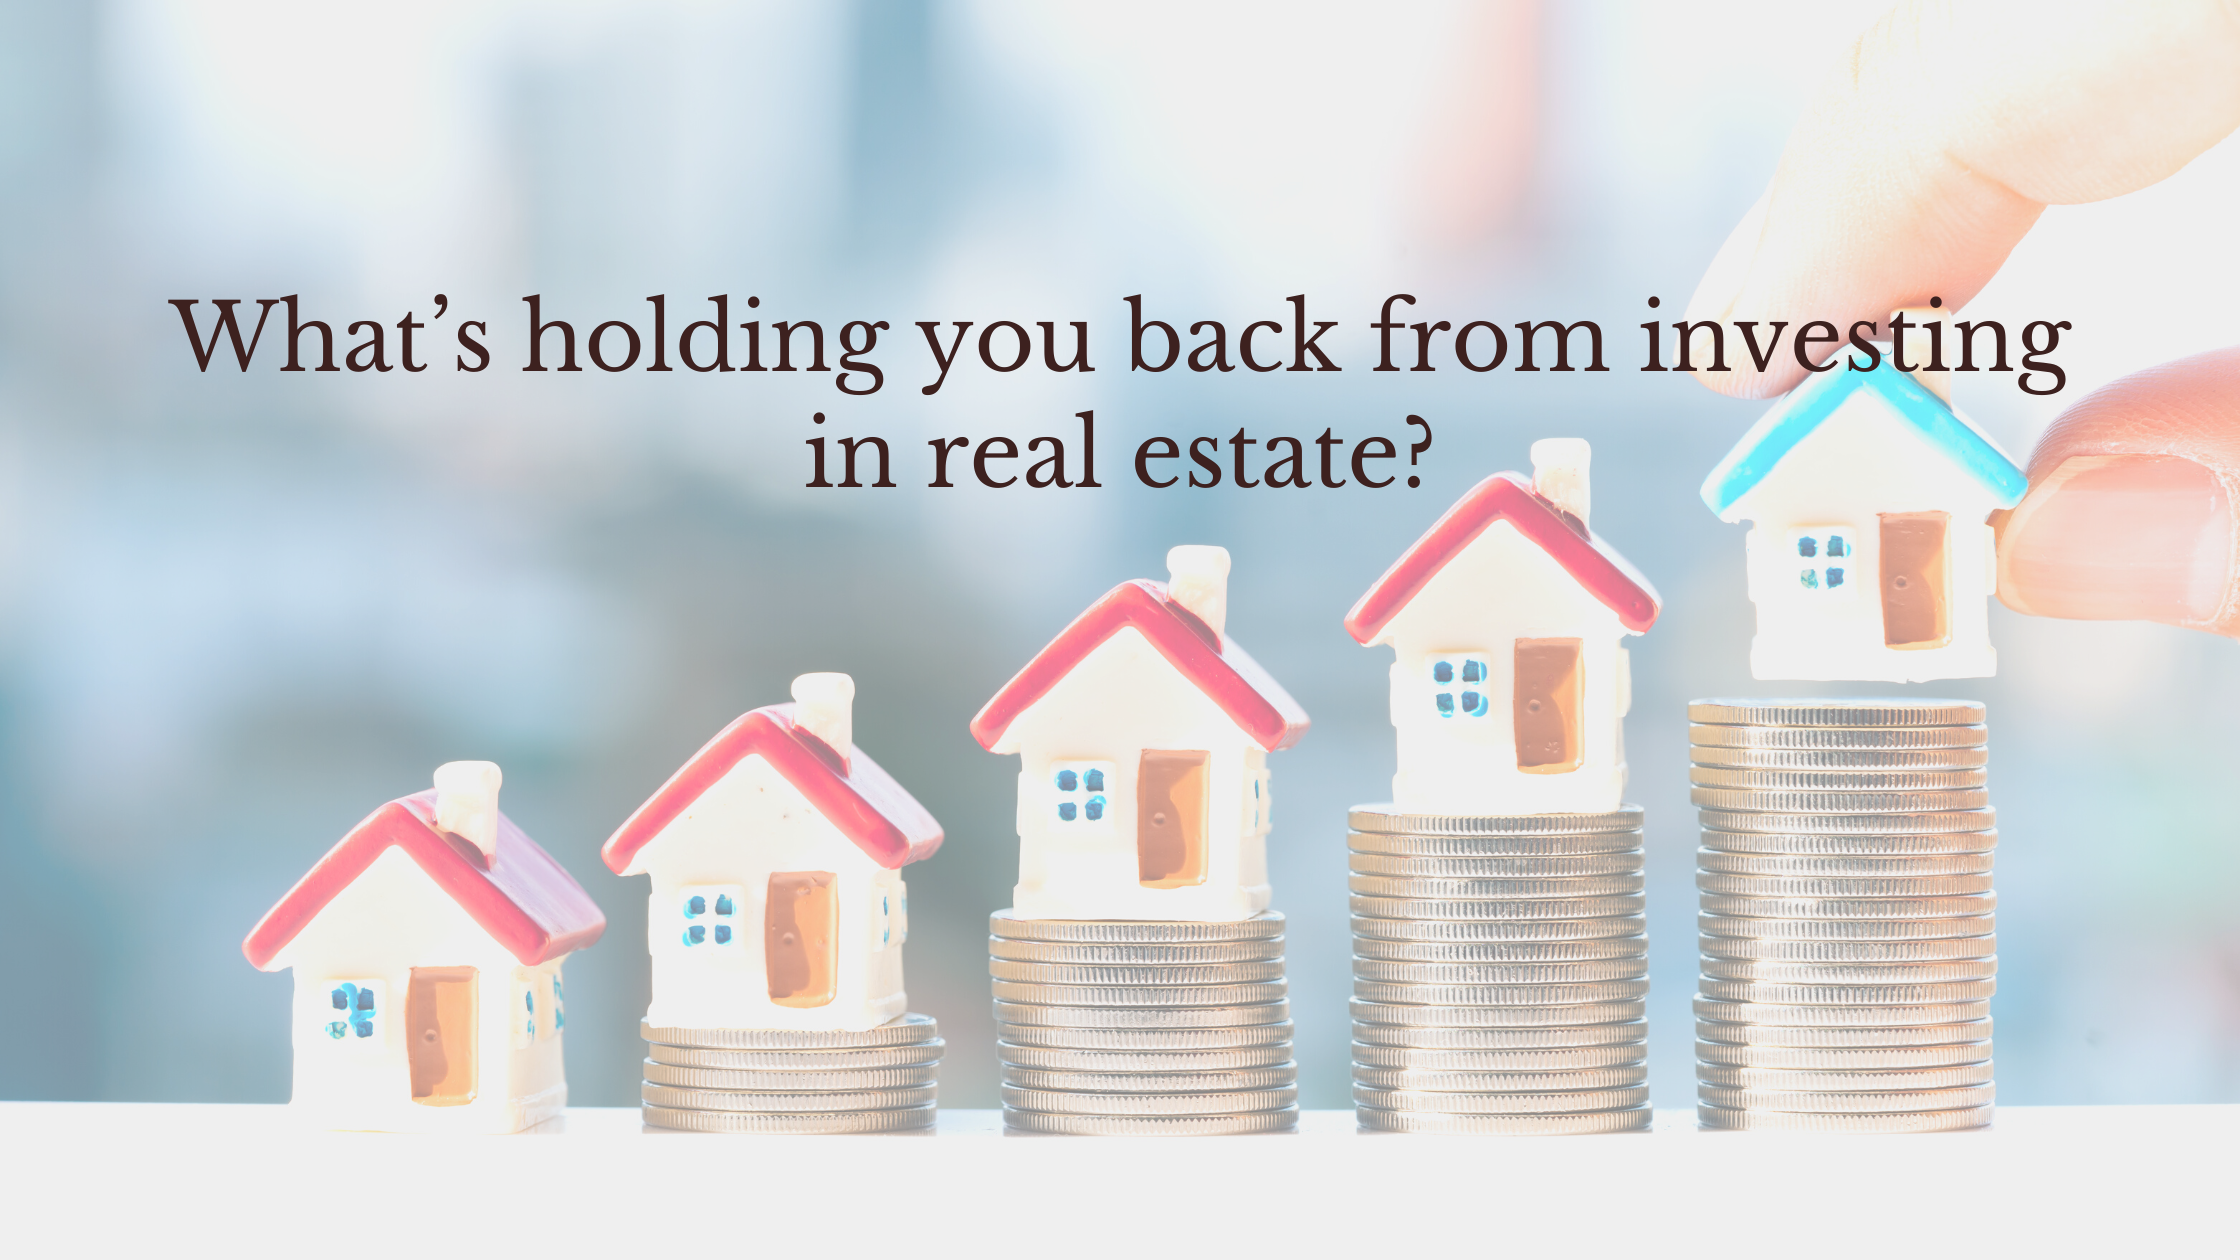 What's holding you back from investing in real estate?